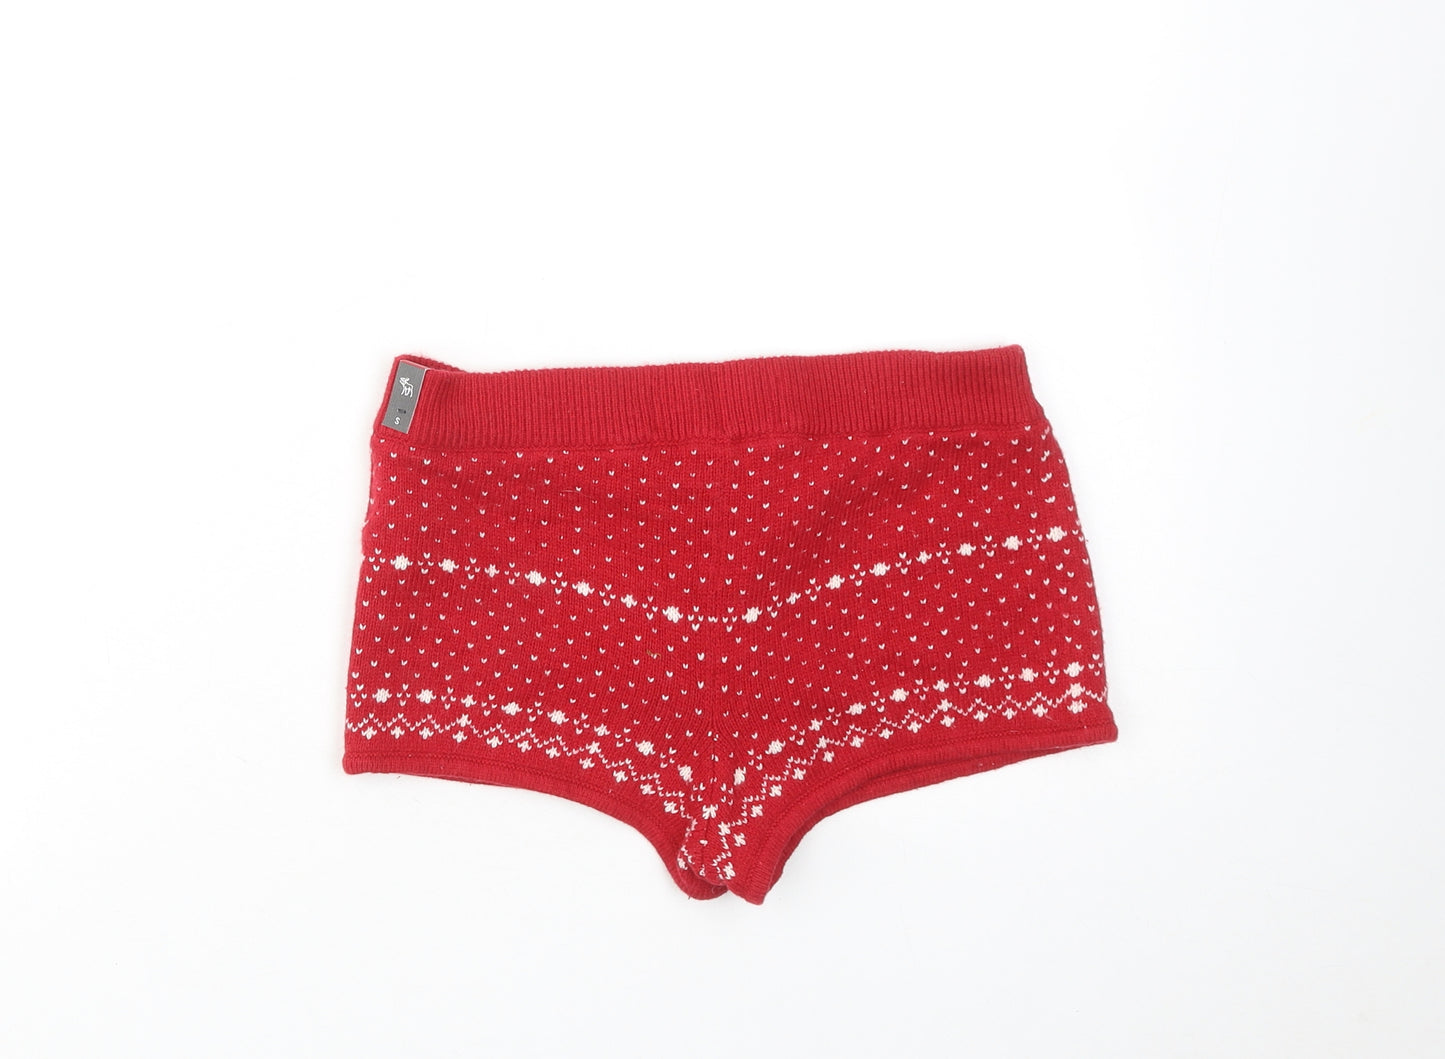 Abercrombie & Fitch Womens Red Geometric Cotton Hot Pants Shorts Size S Regular Drawstring - Christmas Reindeer